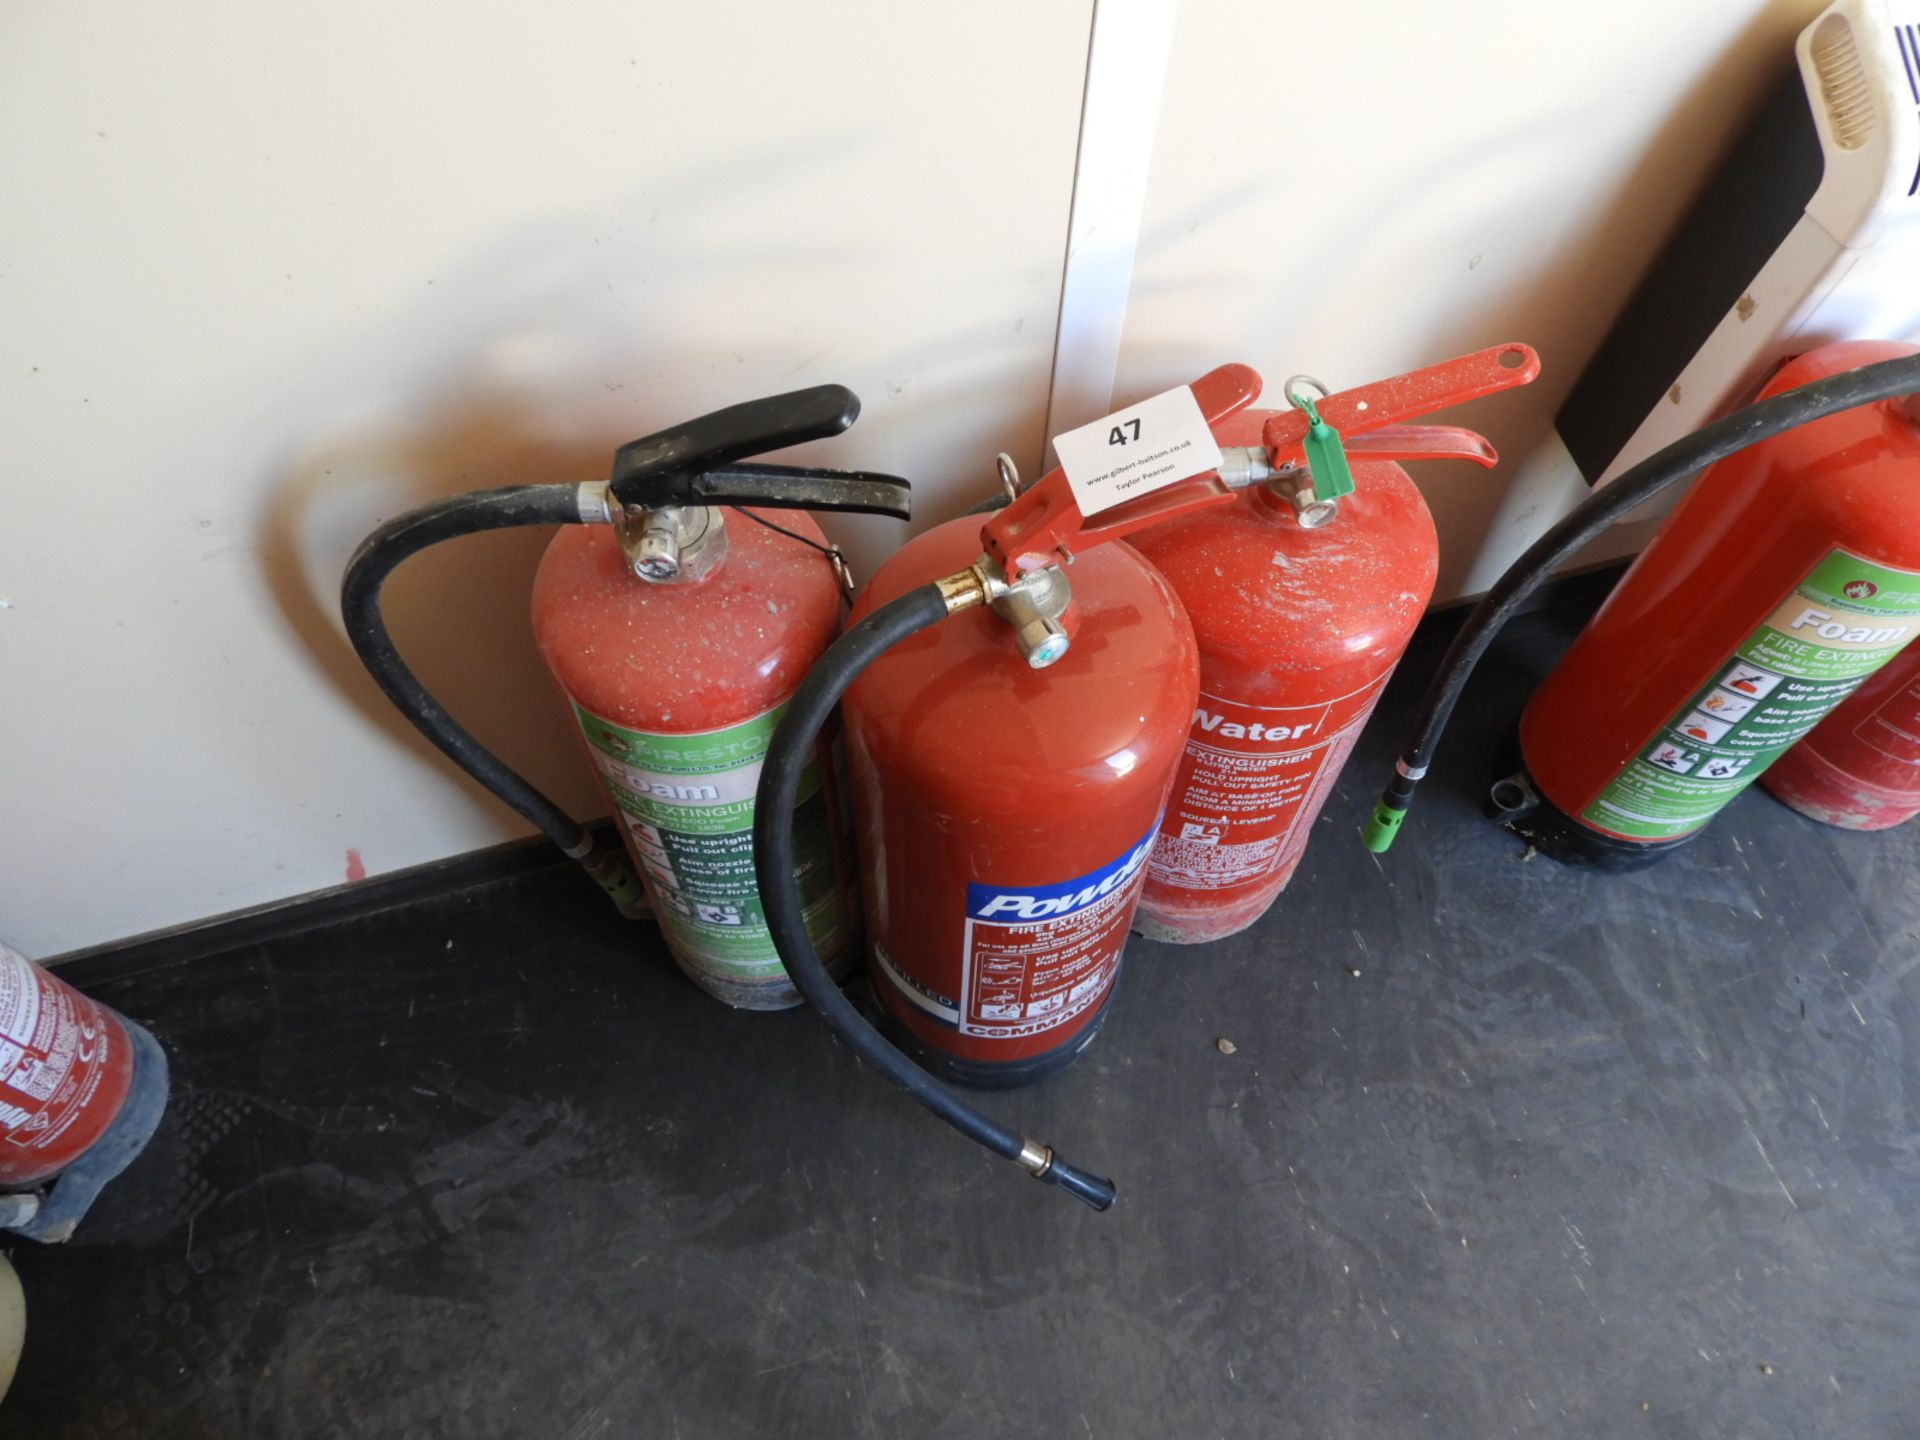 *Foam, Dry Powder and Water Fire Extinguishers